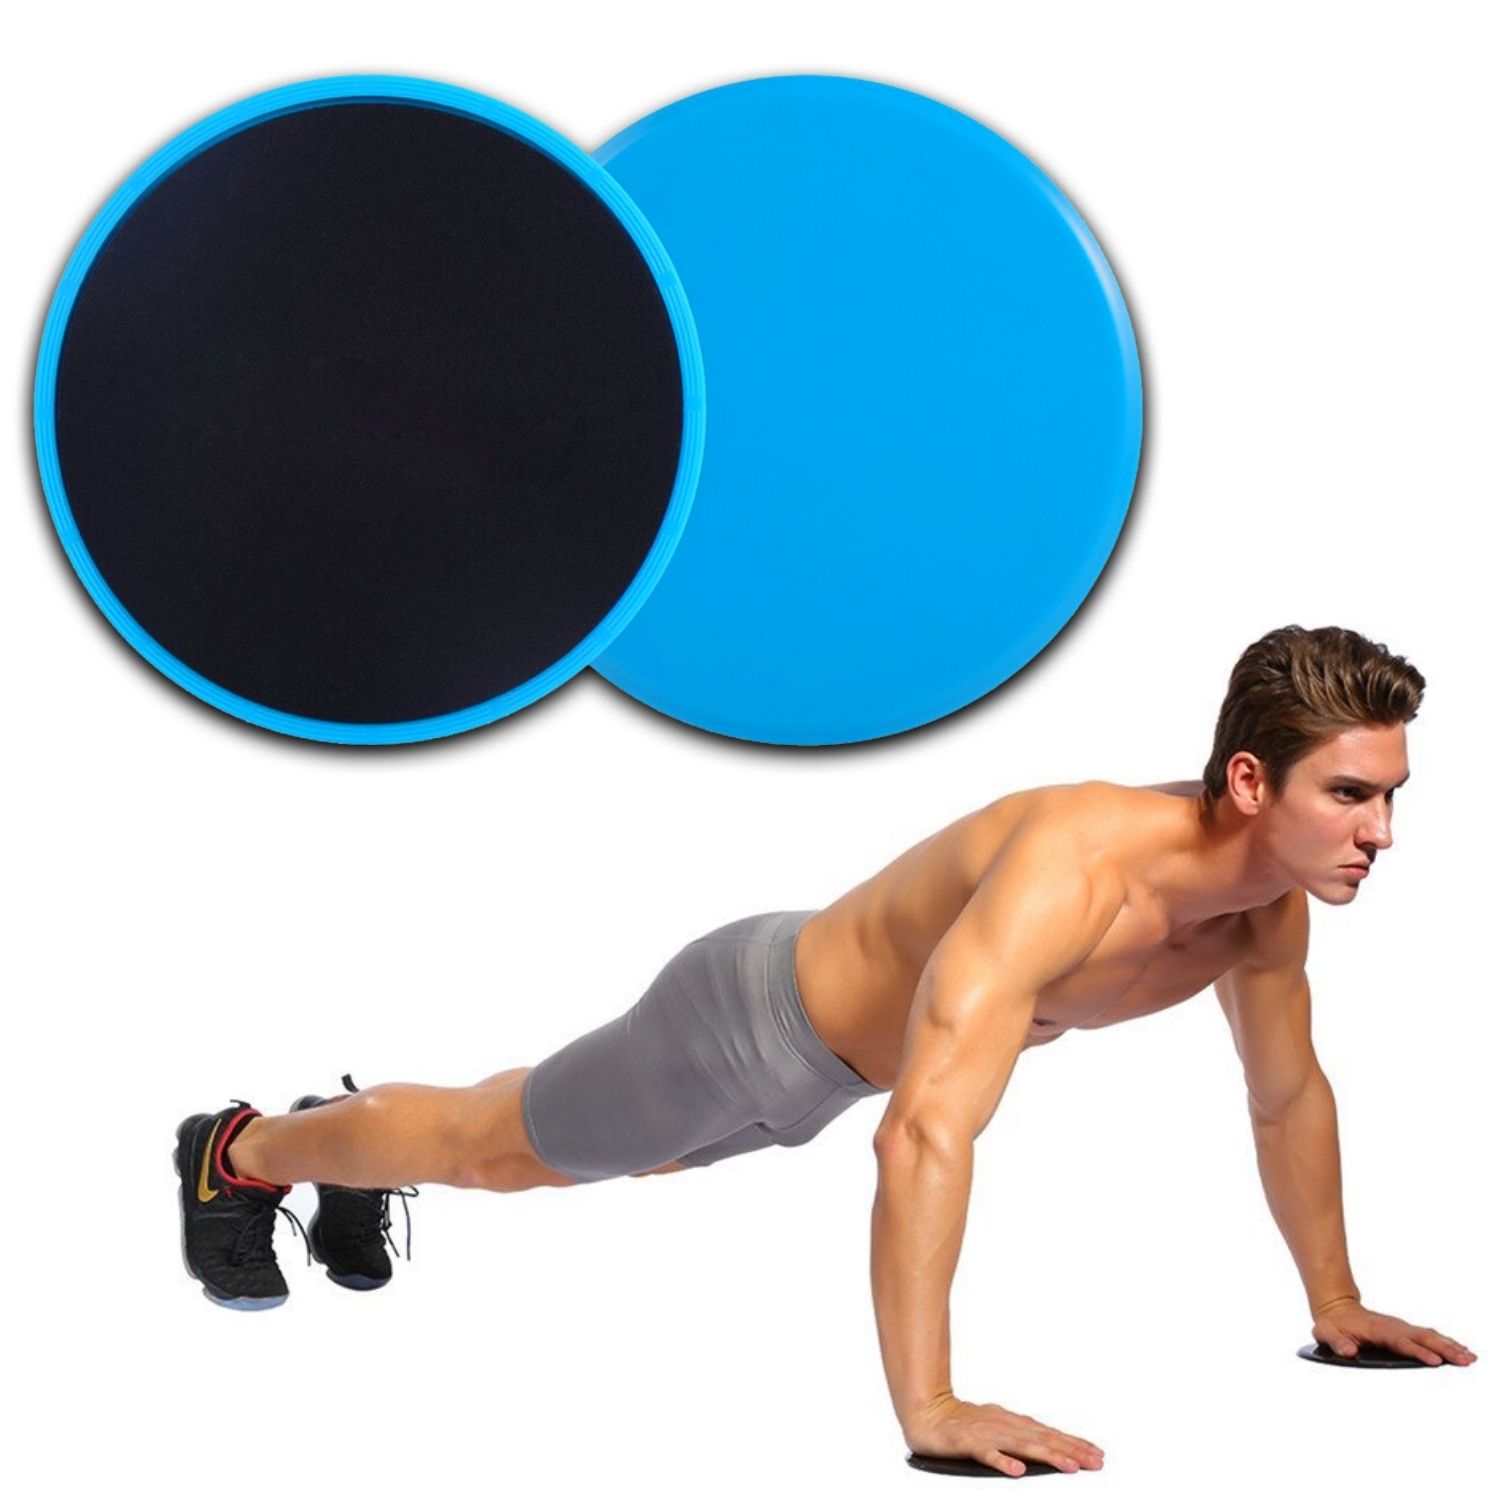 Exercise Core Sliders, Gliding Discs is Designed with Floating